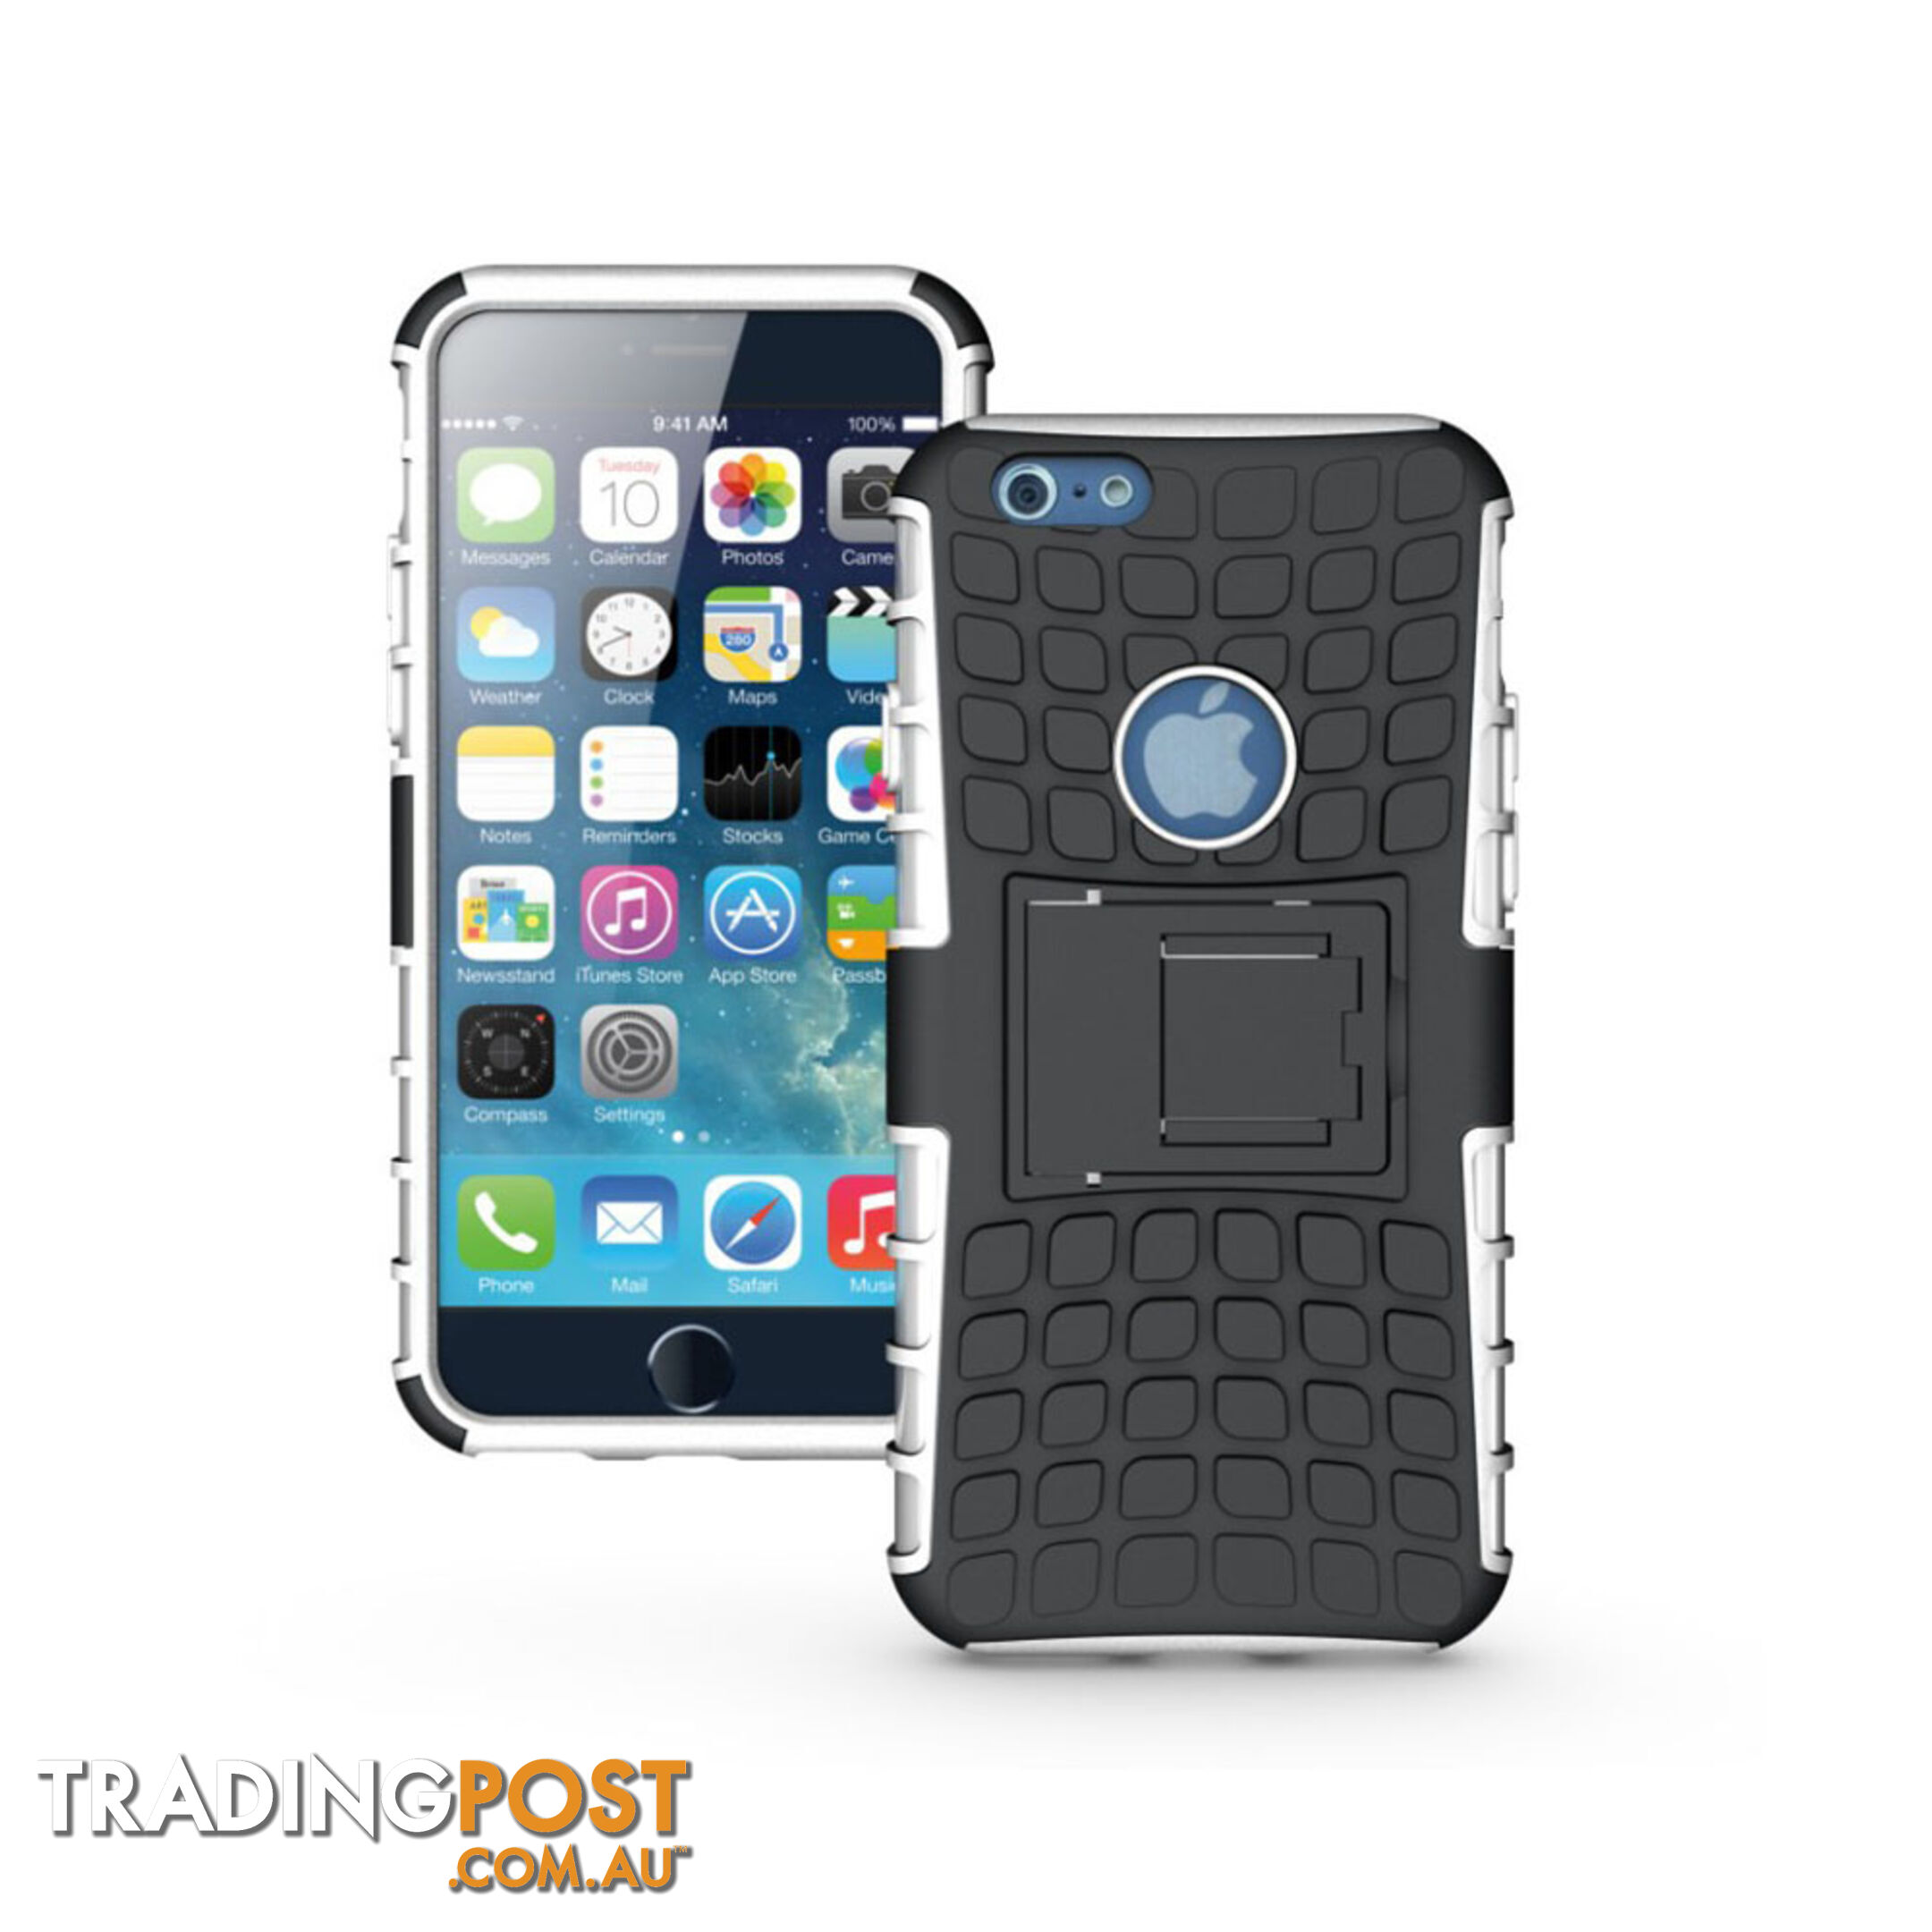 Rugged Heavy Duty Case Cover Accessories White For iPhone 6 4.7 inch